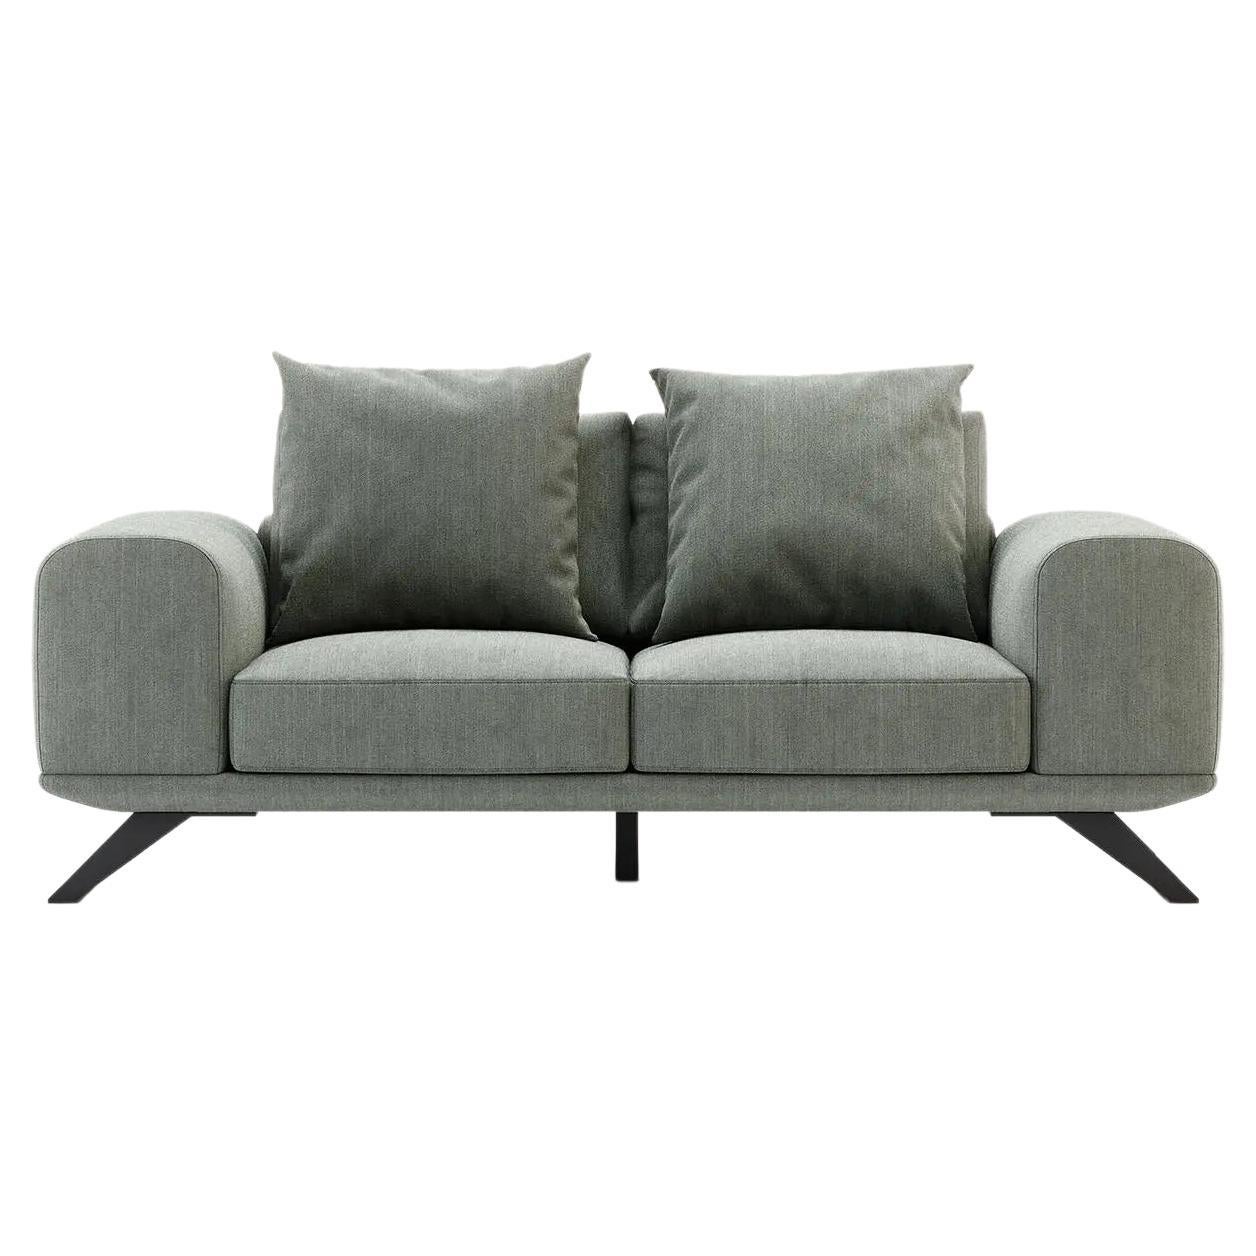 This sofa has a cosmopolitan design that conveys the message of movement and modern flow. A velvet sofa with steel legs that will sit proudly in the middle of a living room. In a unique contemporary style, this sofa is already a